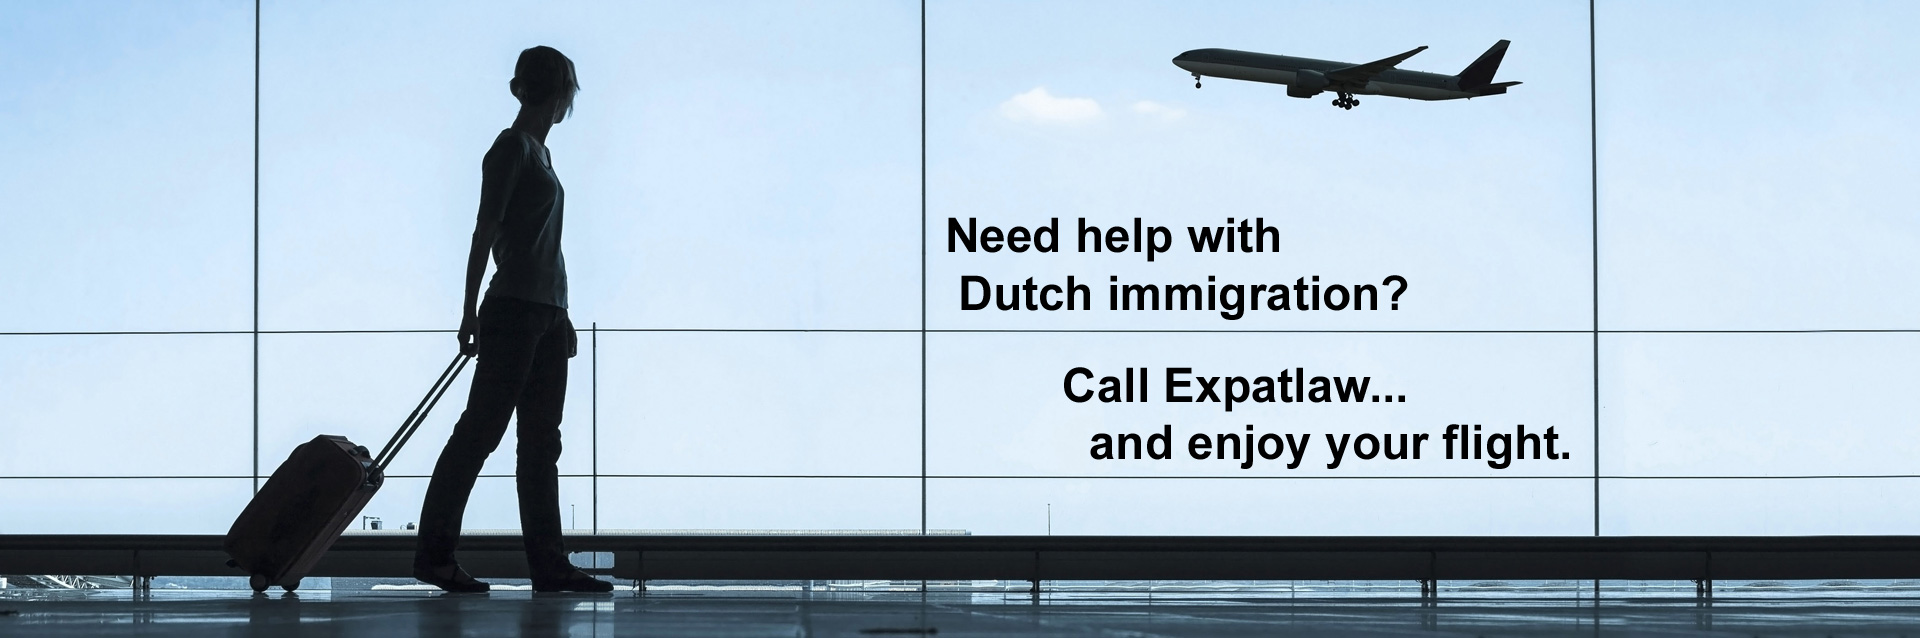 Need help with Dutch immigration? Call Expatlaw...and enjoy your flight.